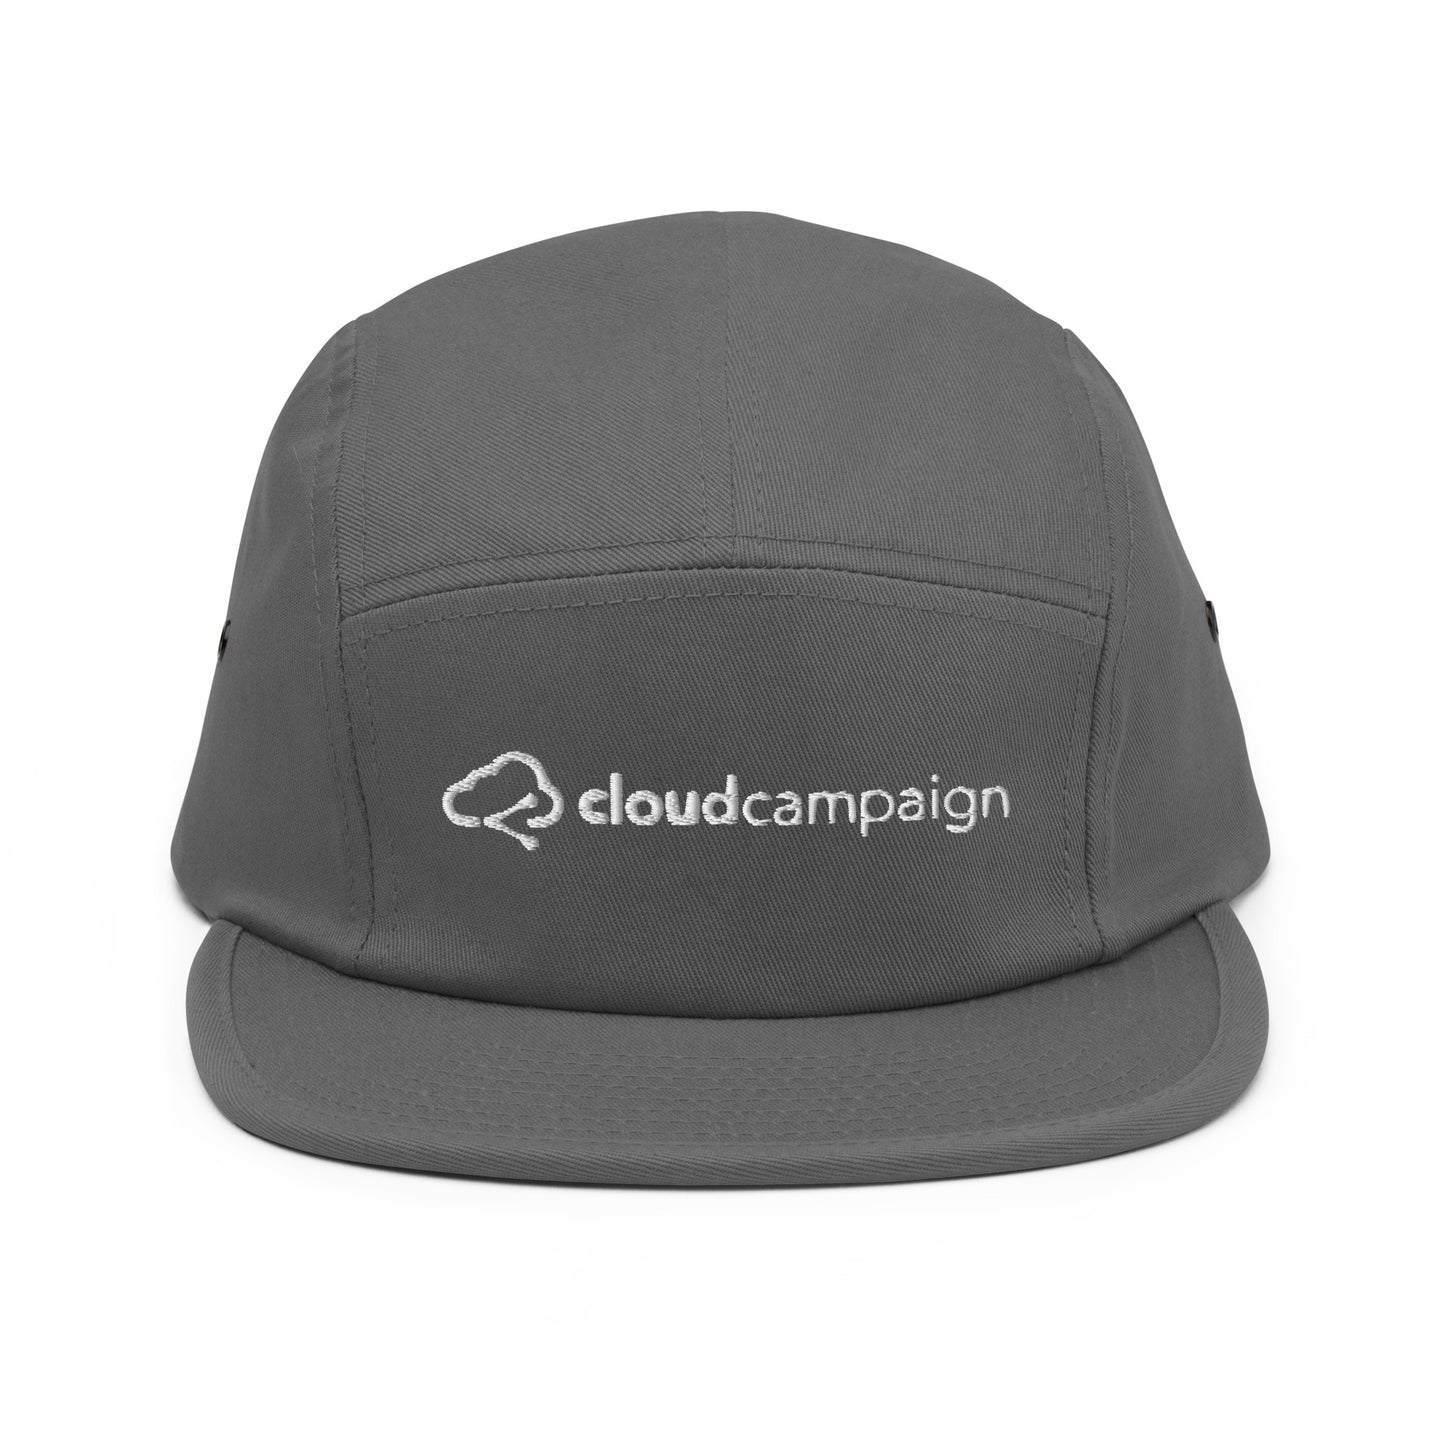 Five panel cap w/ white Cloud Campaign embroidery